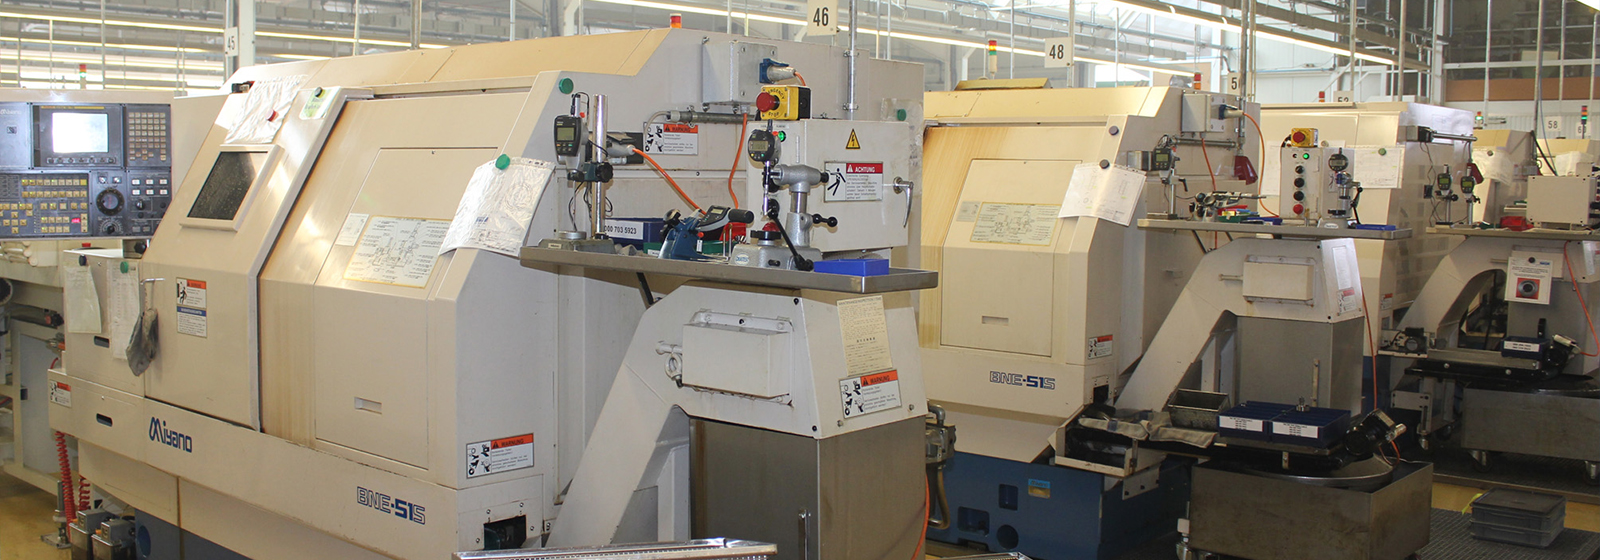 Seeger production facility with CNC machines